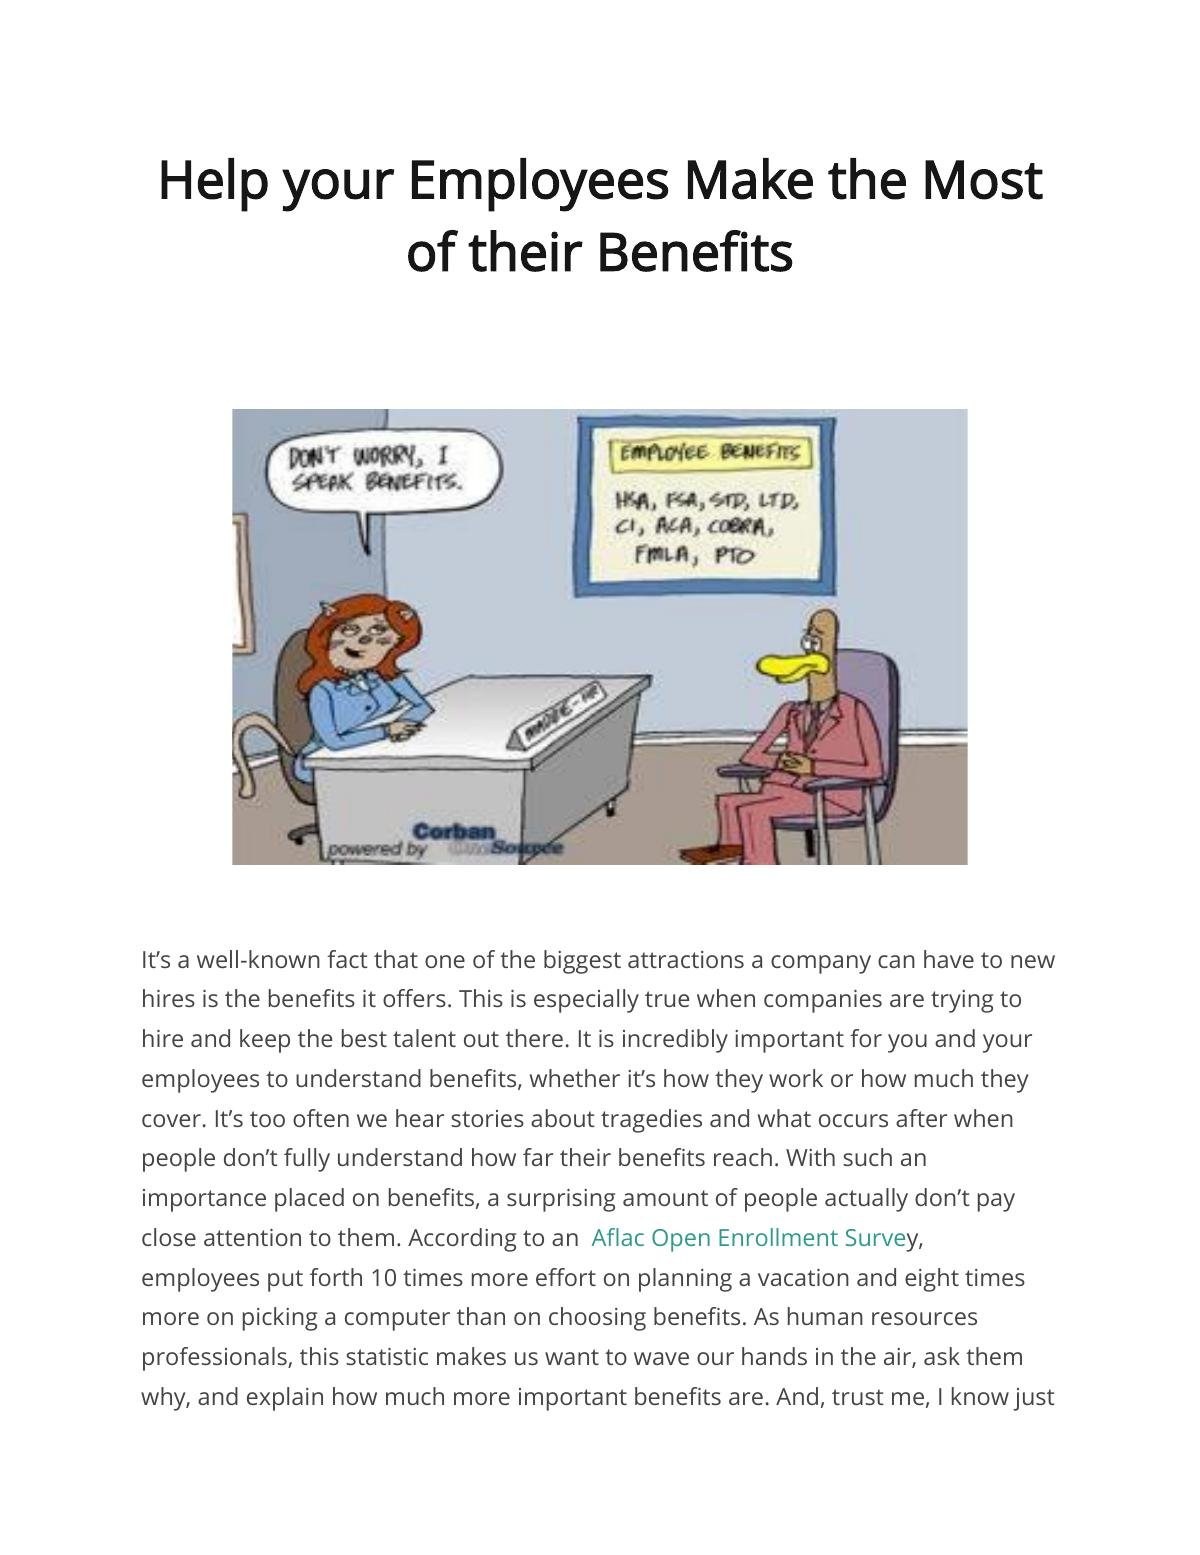 Help your Employees Make the Most of their Benefits     